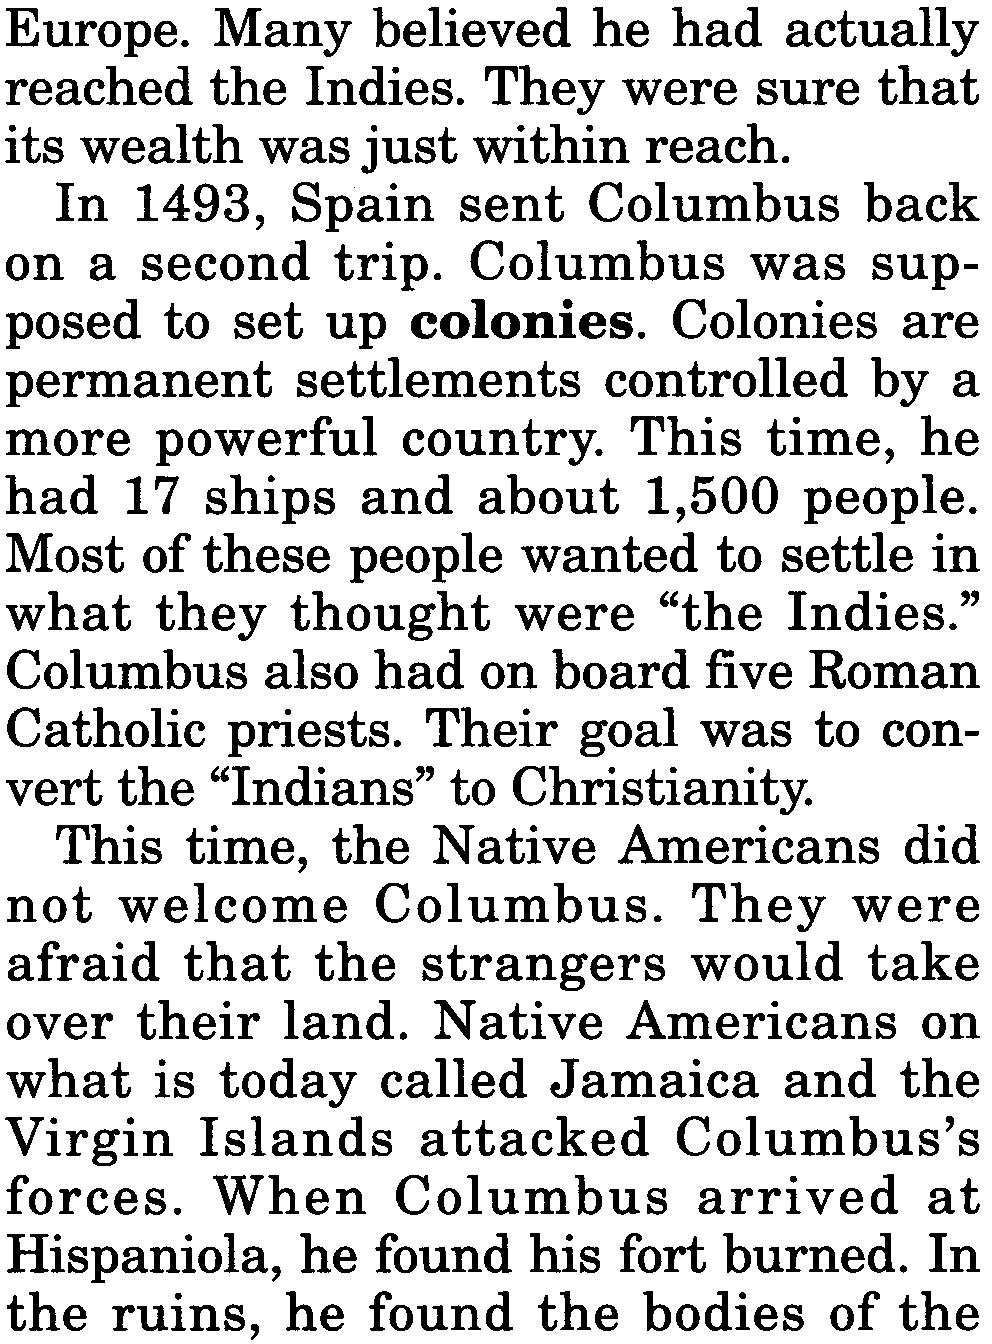 They show as much love as if they were giving their hearts." Columbus continued his voyage. He landed on a larger island that he named Hispaniola, (hihs-pan- YOH-Iah) or "Little Spain.